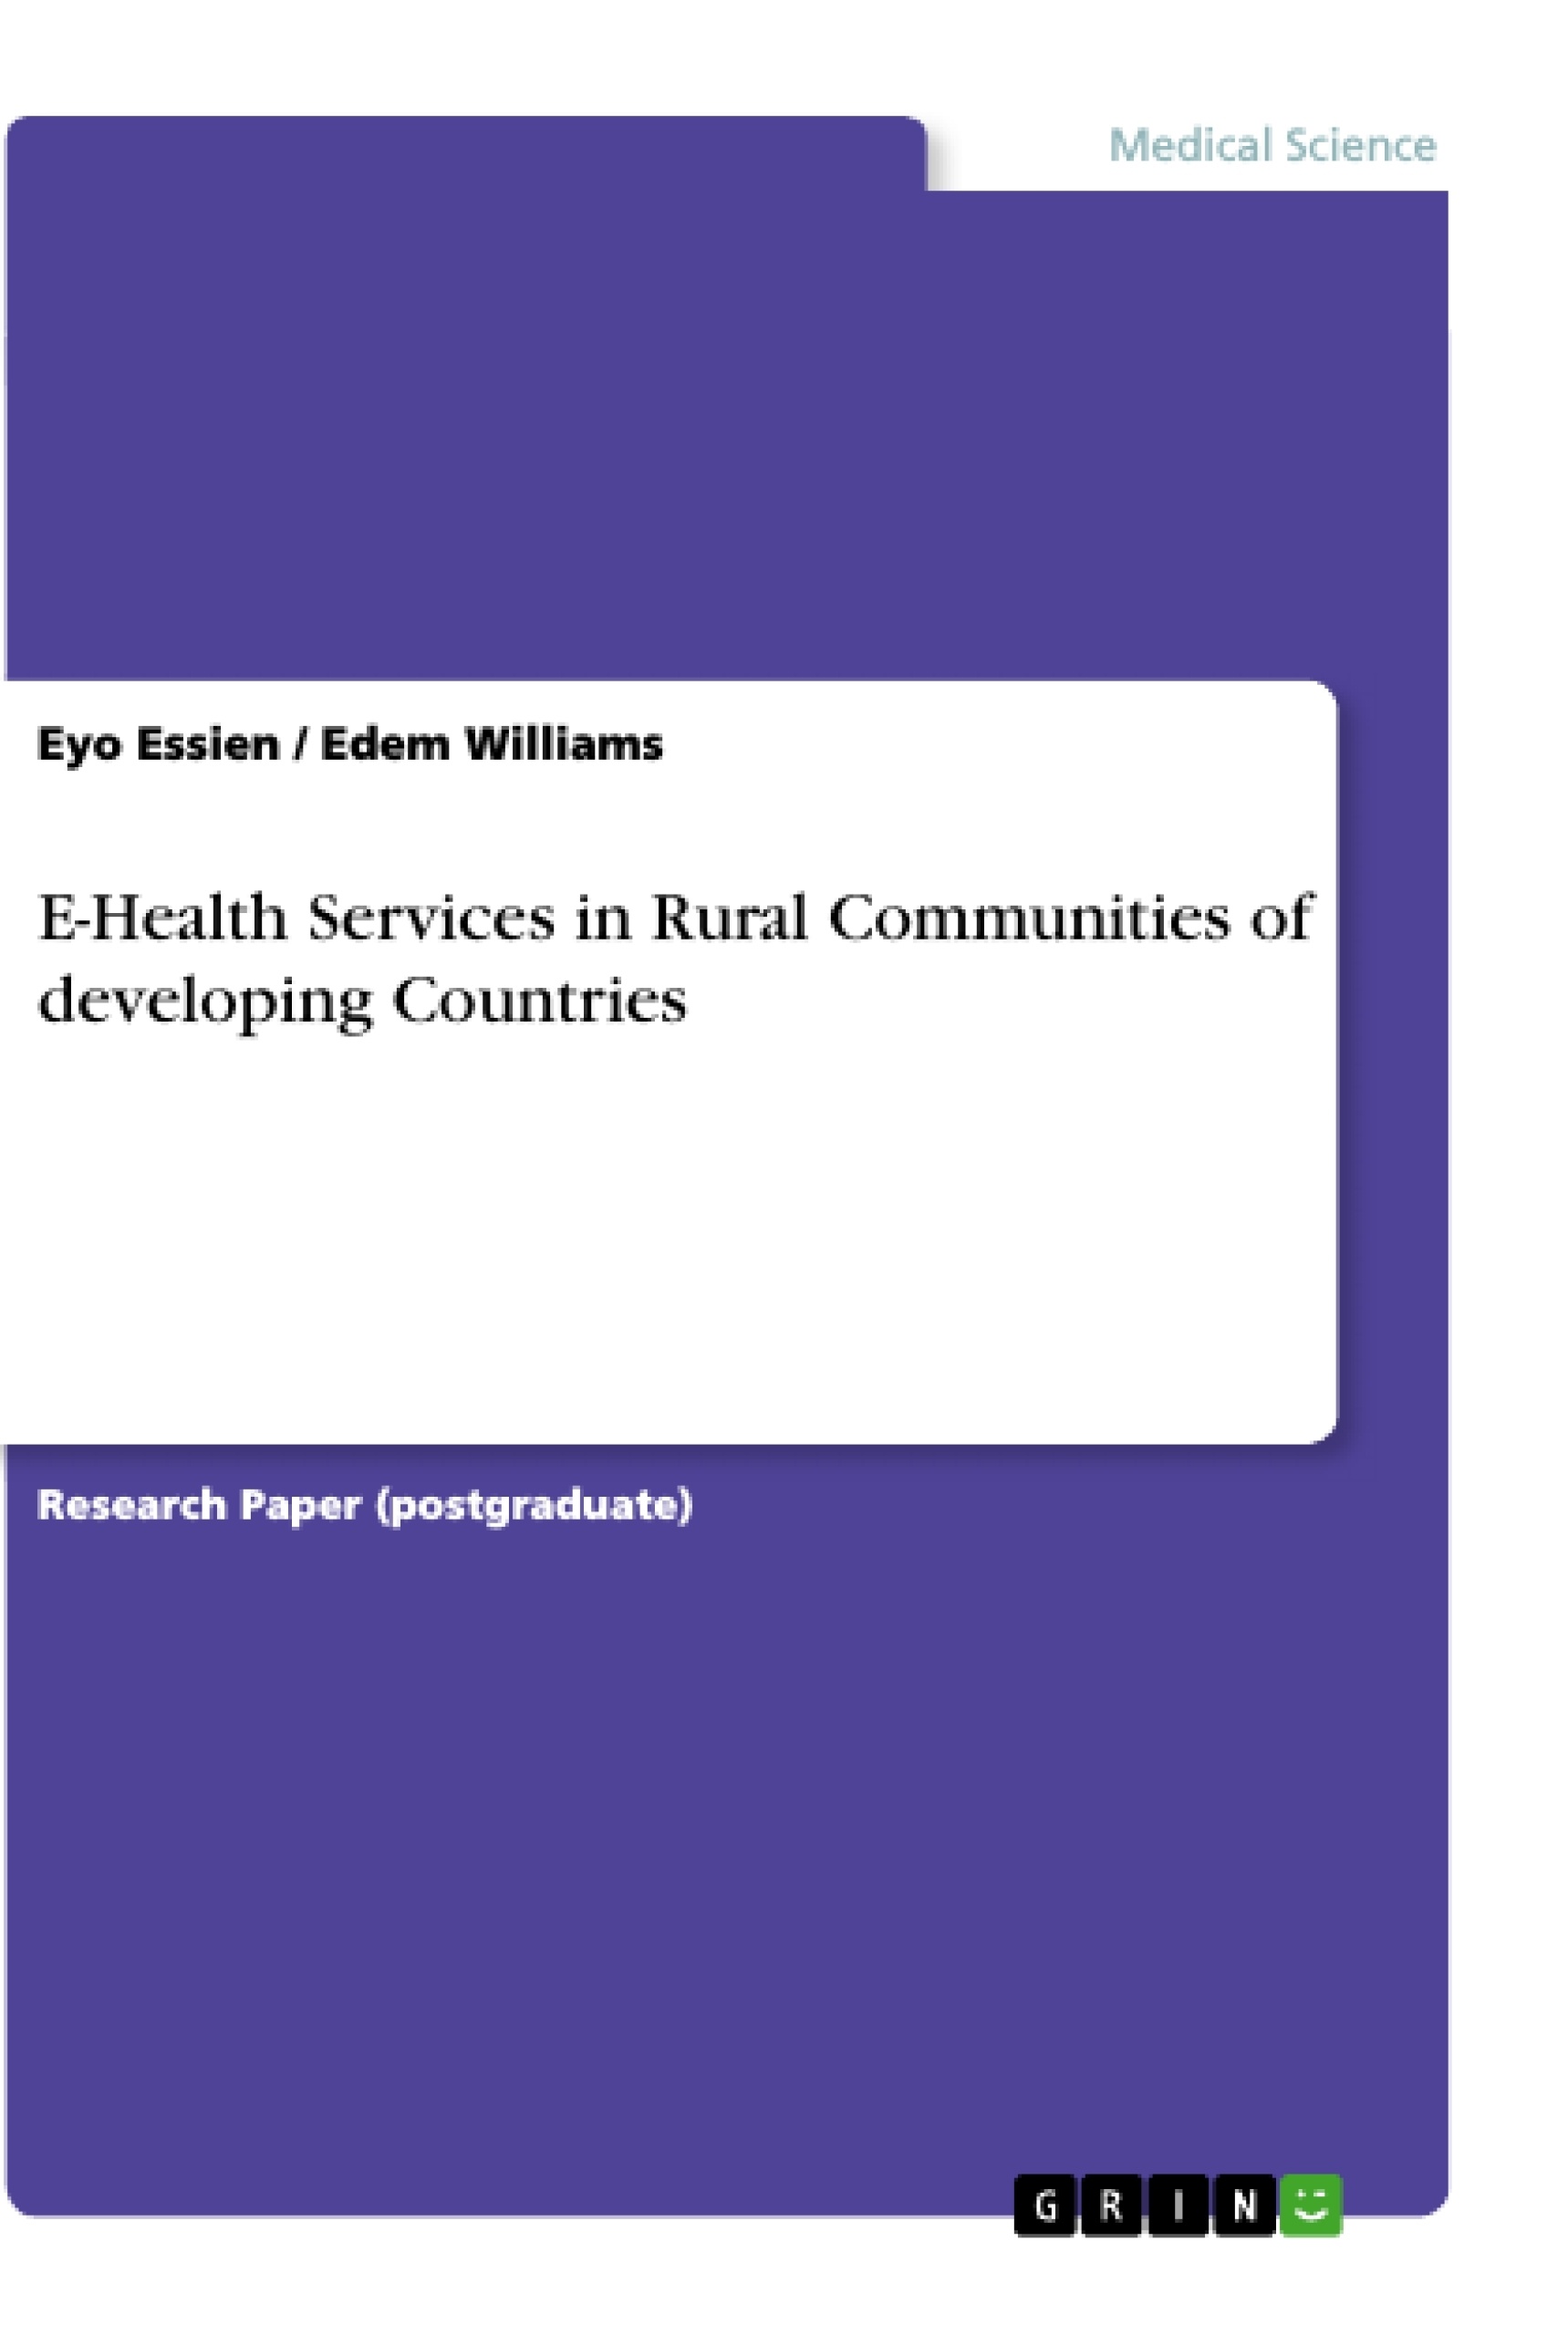 Title: E-Health Services in Rural Communities of developing Countries